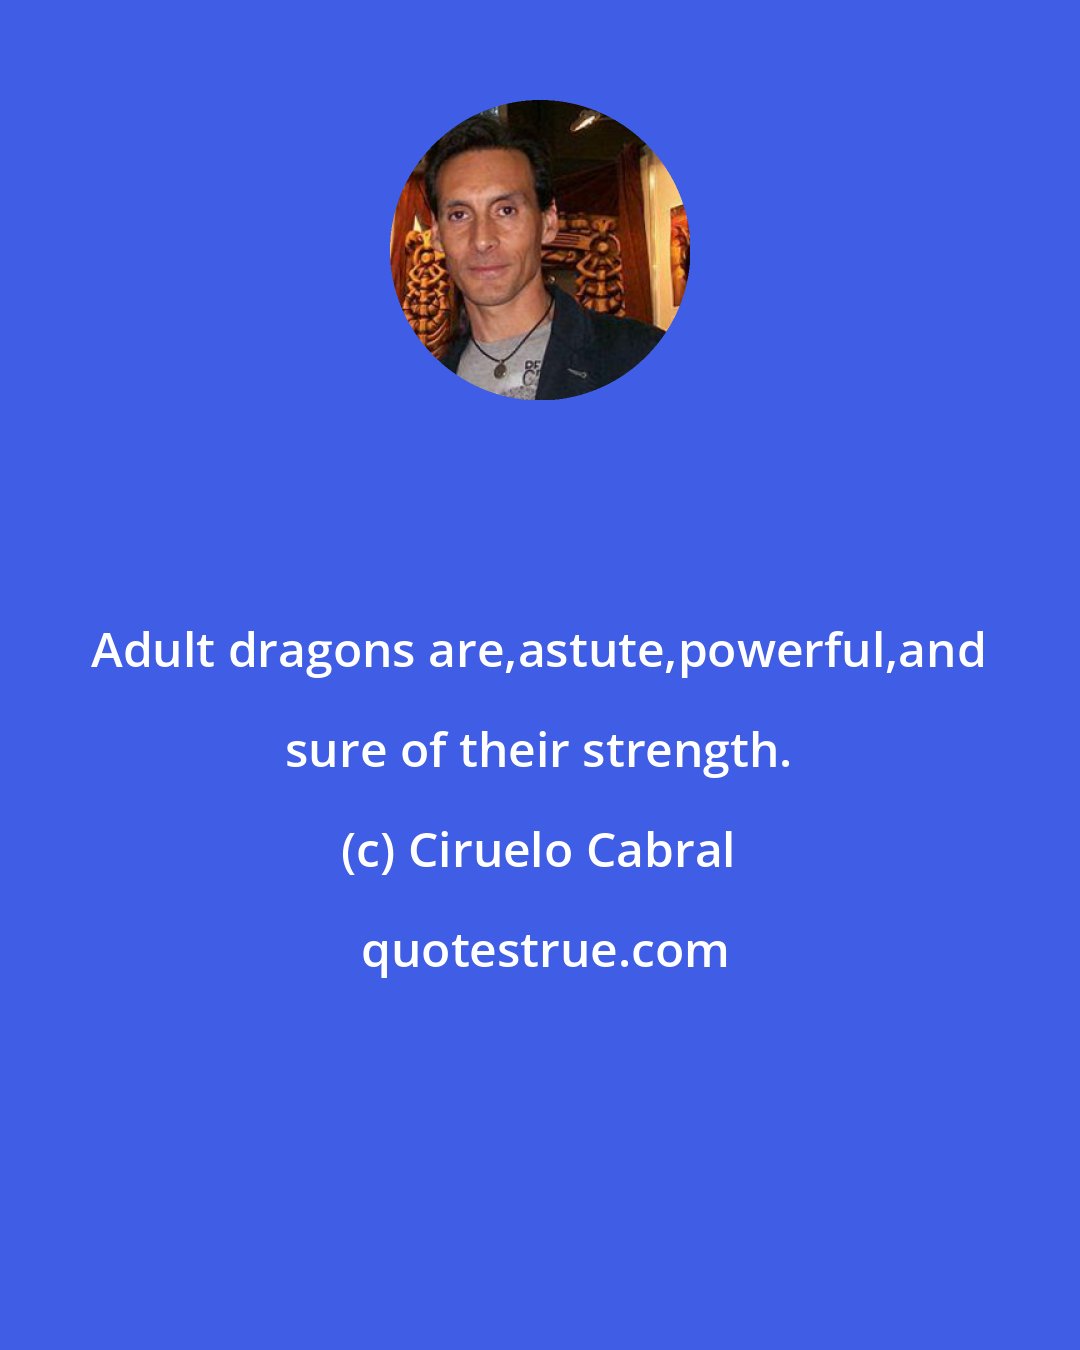 Ciruelo Cabral: Adult dragons are,astute,powerful,and sure of their strength.